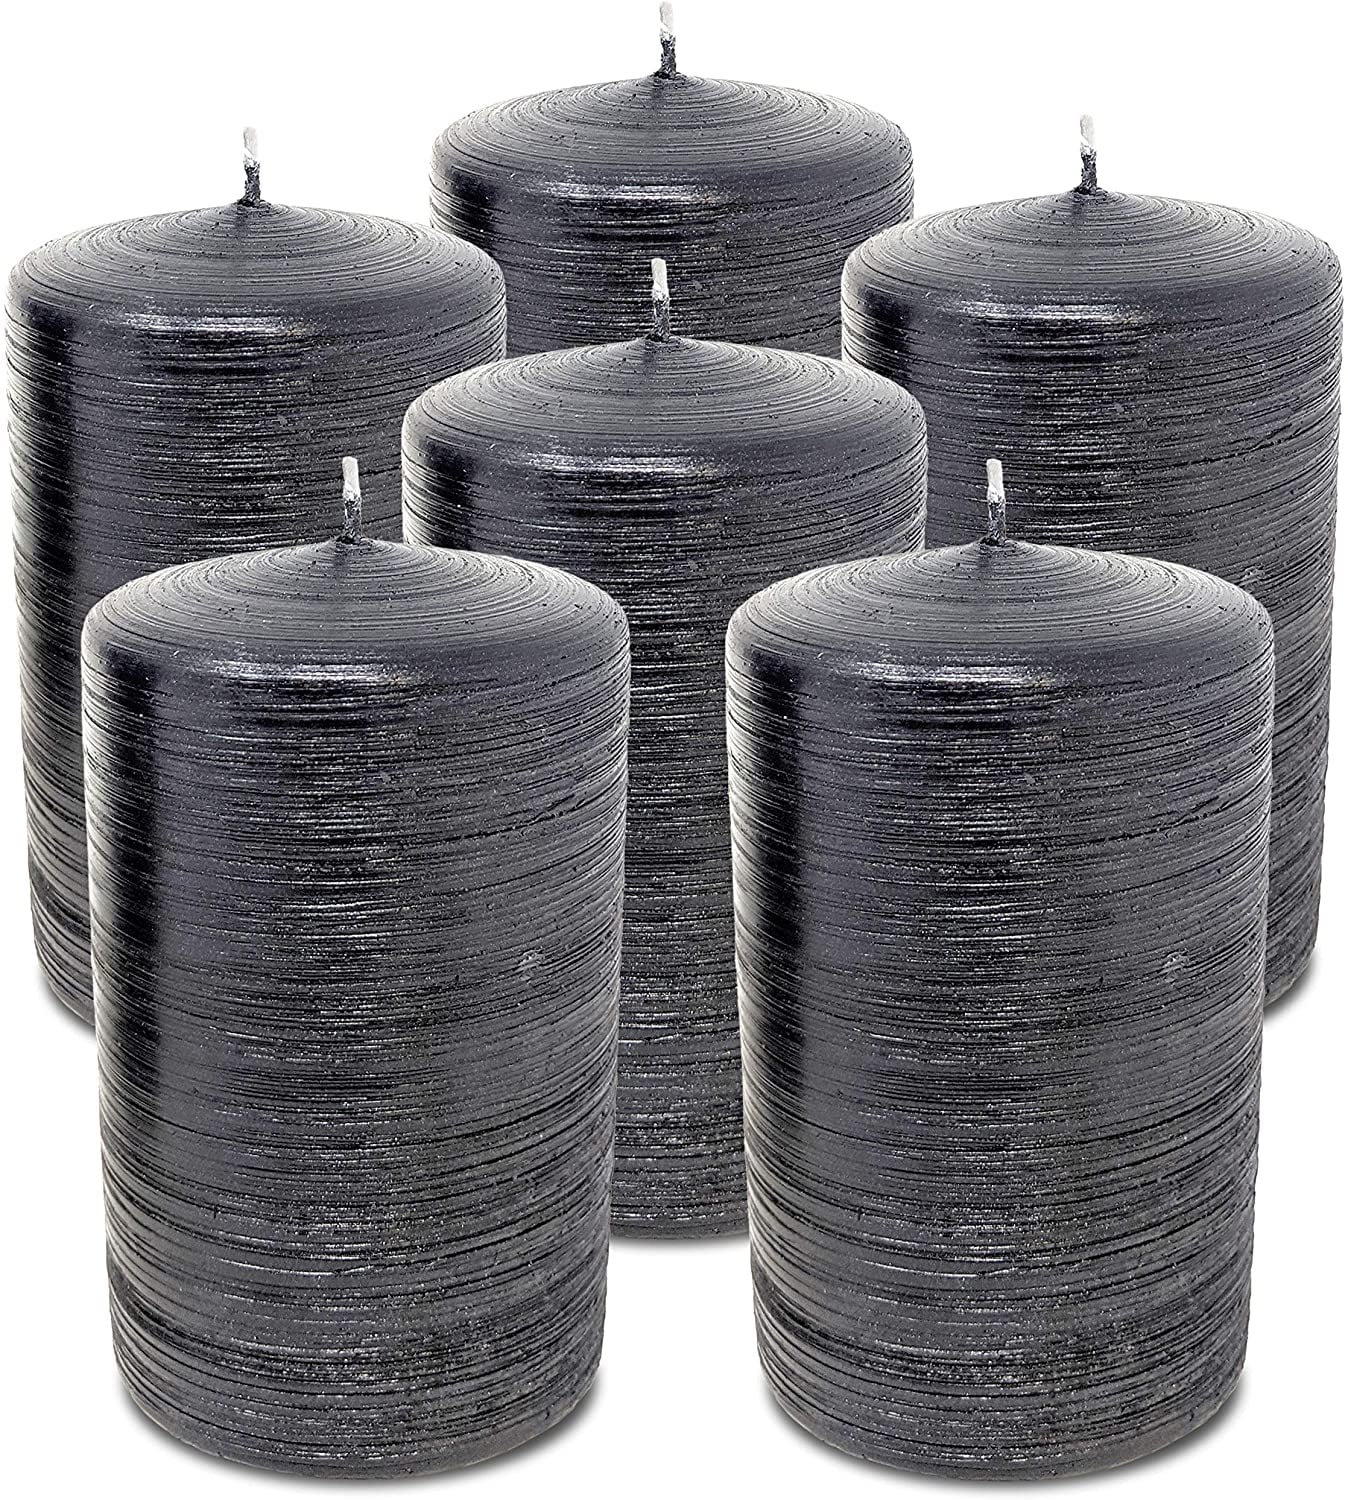 Set of 3 Charcoal Pillar Candles Dark Grey 3" x 4" Rustic Unscented Dripless ... 